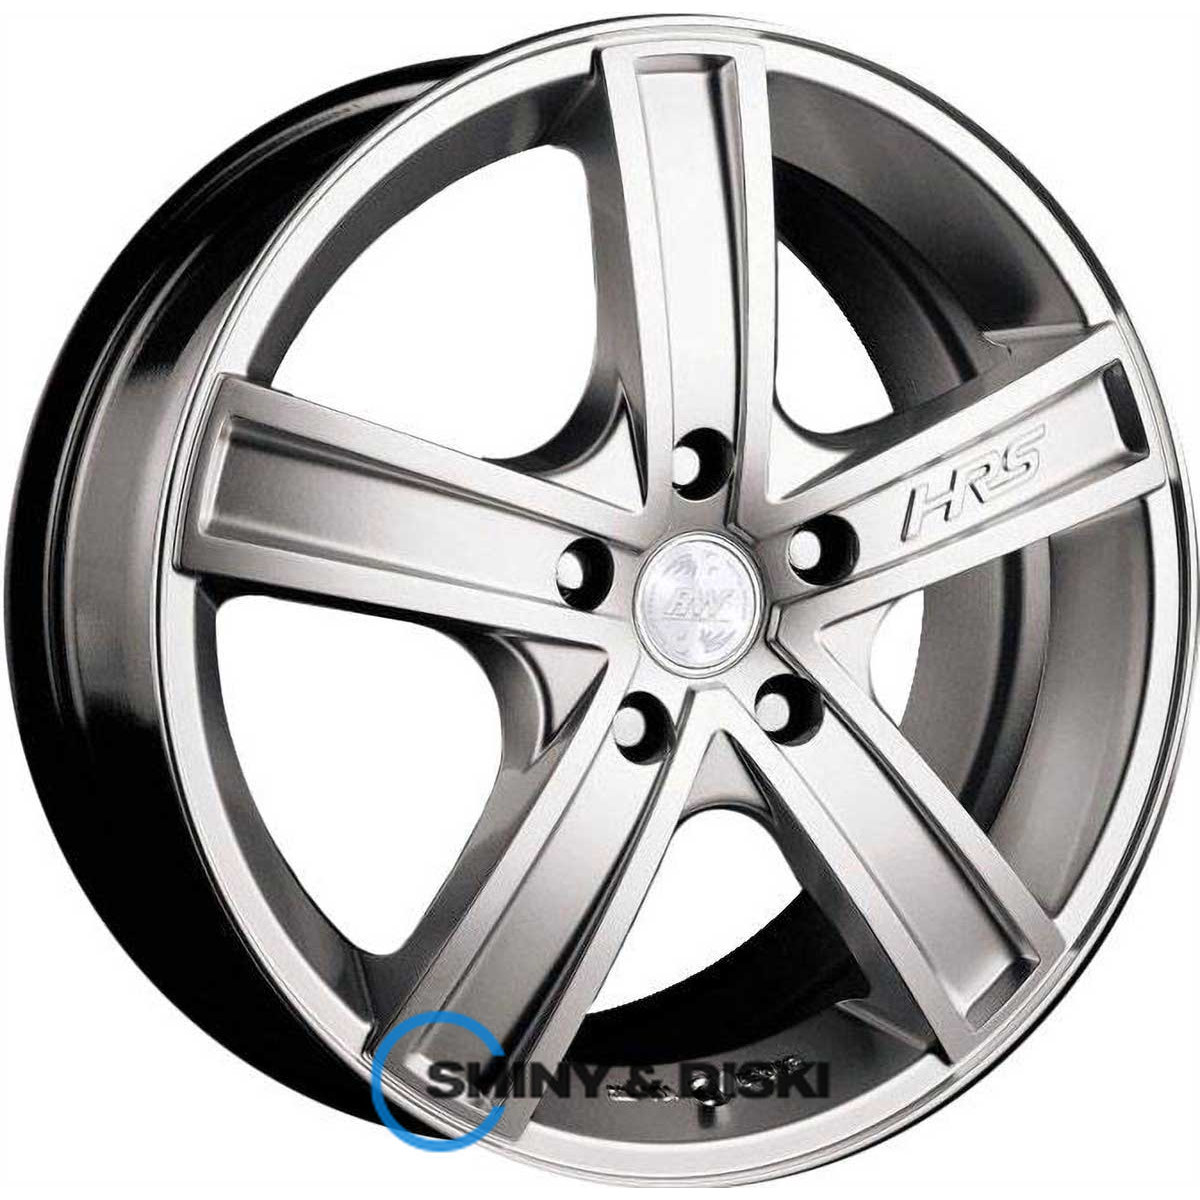 rs tuning h-412 bkfp r16 w7 pcd5x114.3 et35 dia67.1